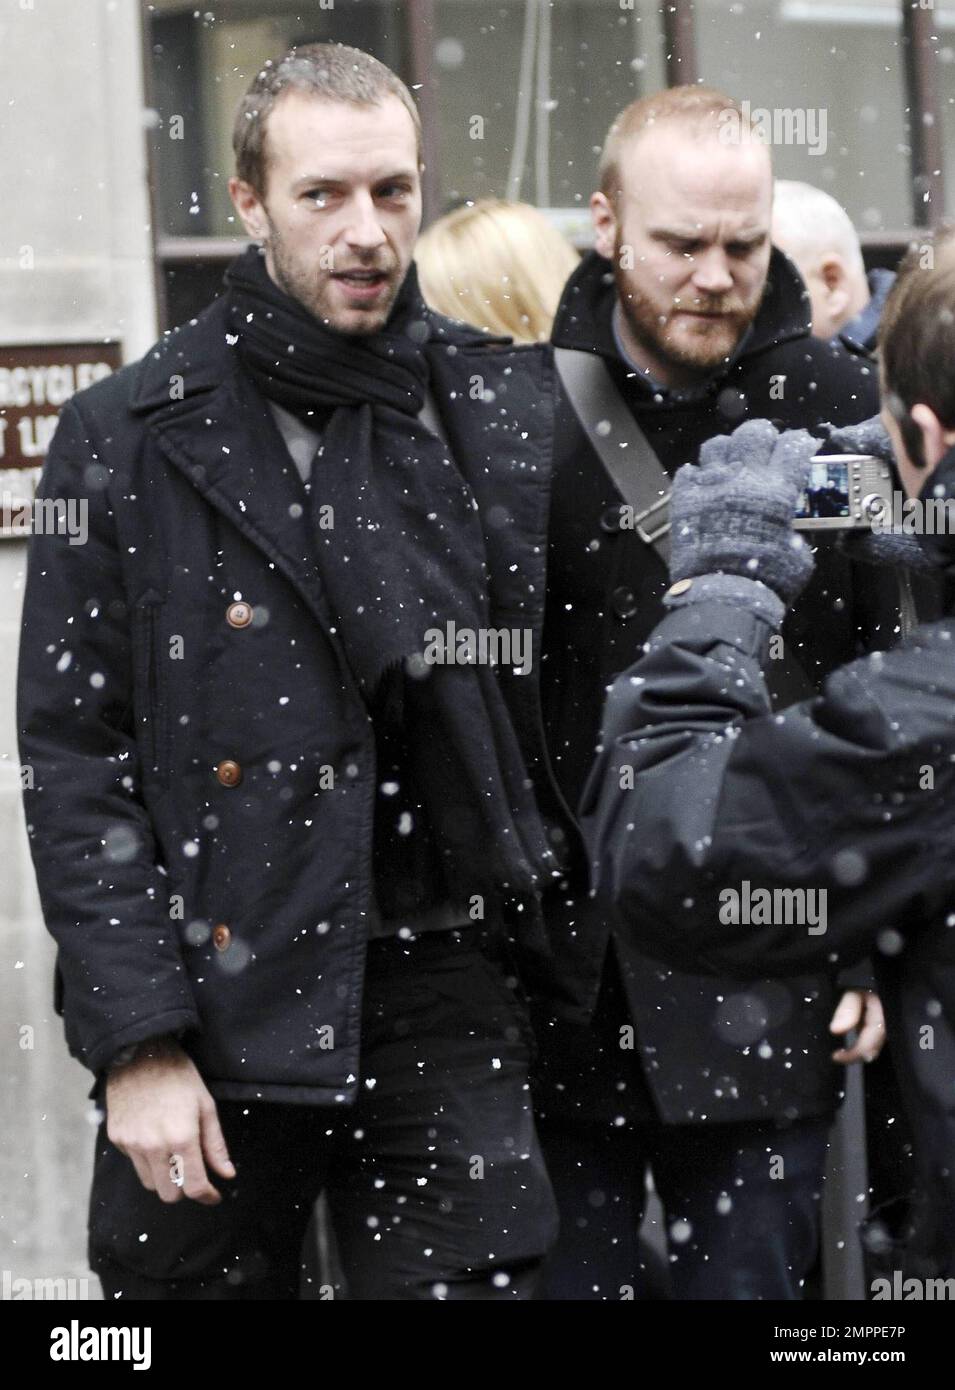 UK band Coldplay look in lively spirits as they stand outside BBC Radio  studios during a snowy afternoon. The group, Chris Martin, Jonny Buckland,  Guy Berryman and Will Champion, appeared on BBC